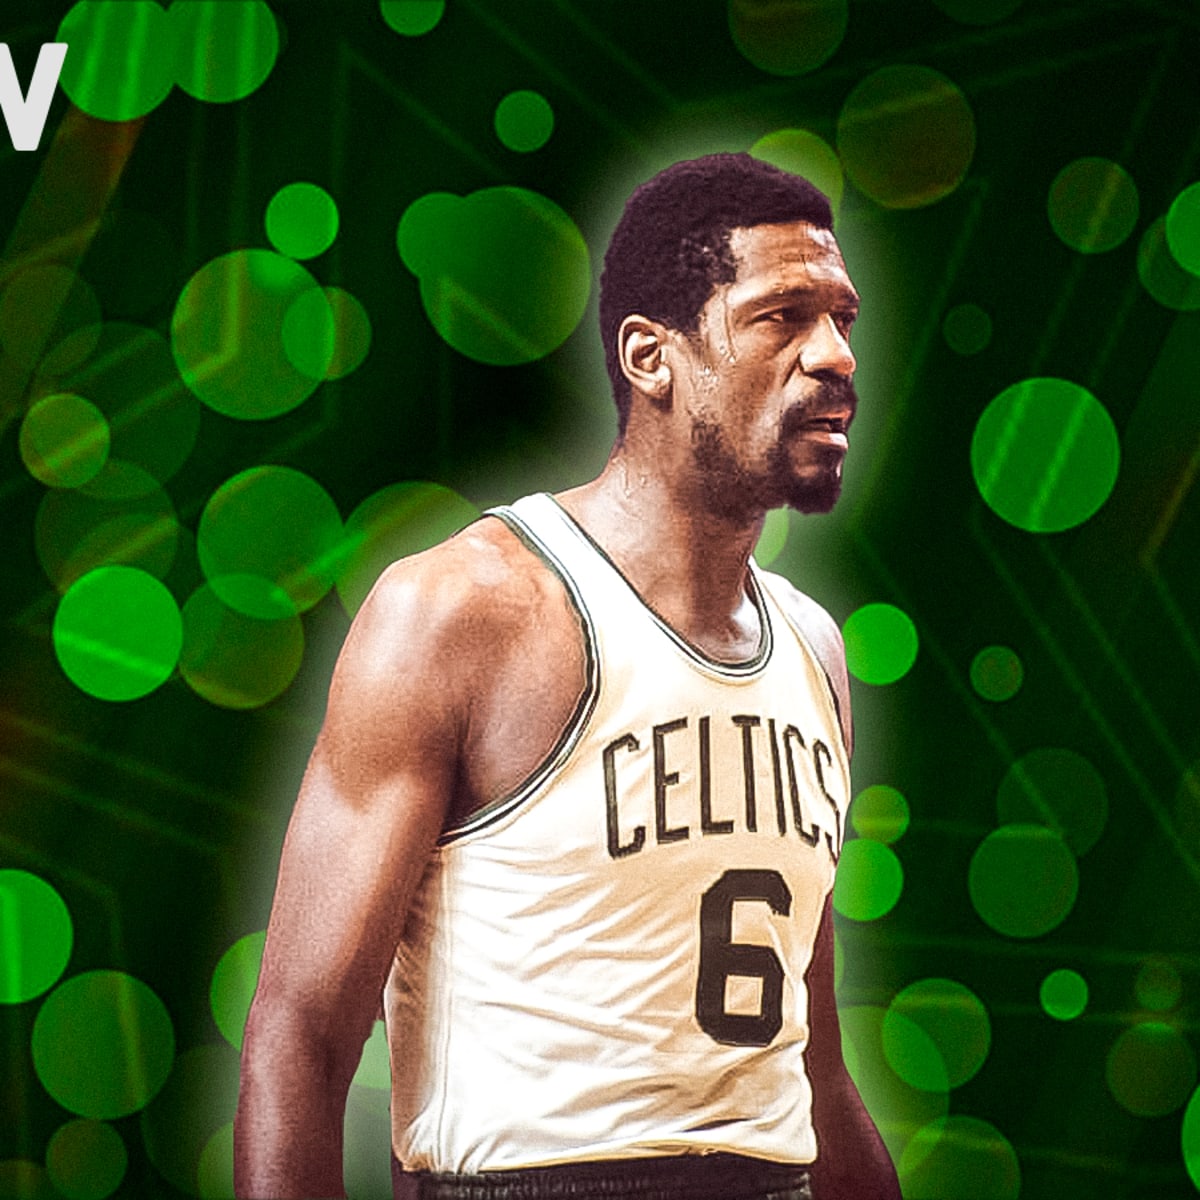 NBA to retire Bill Russell's No. 6 jersey throughout the league as